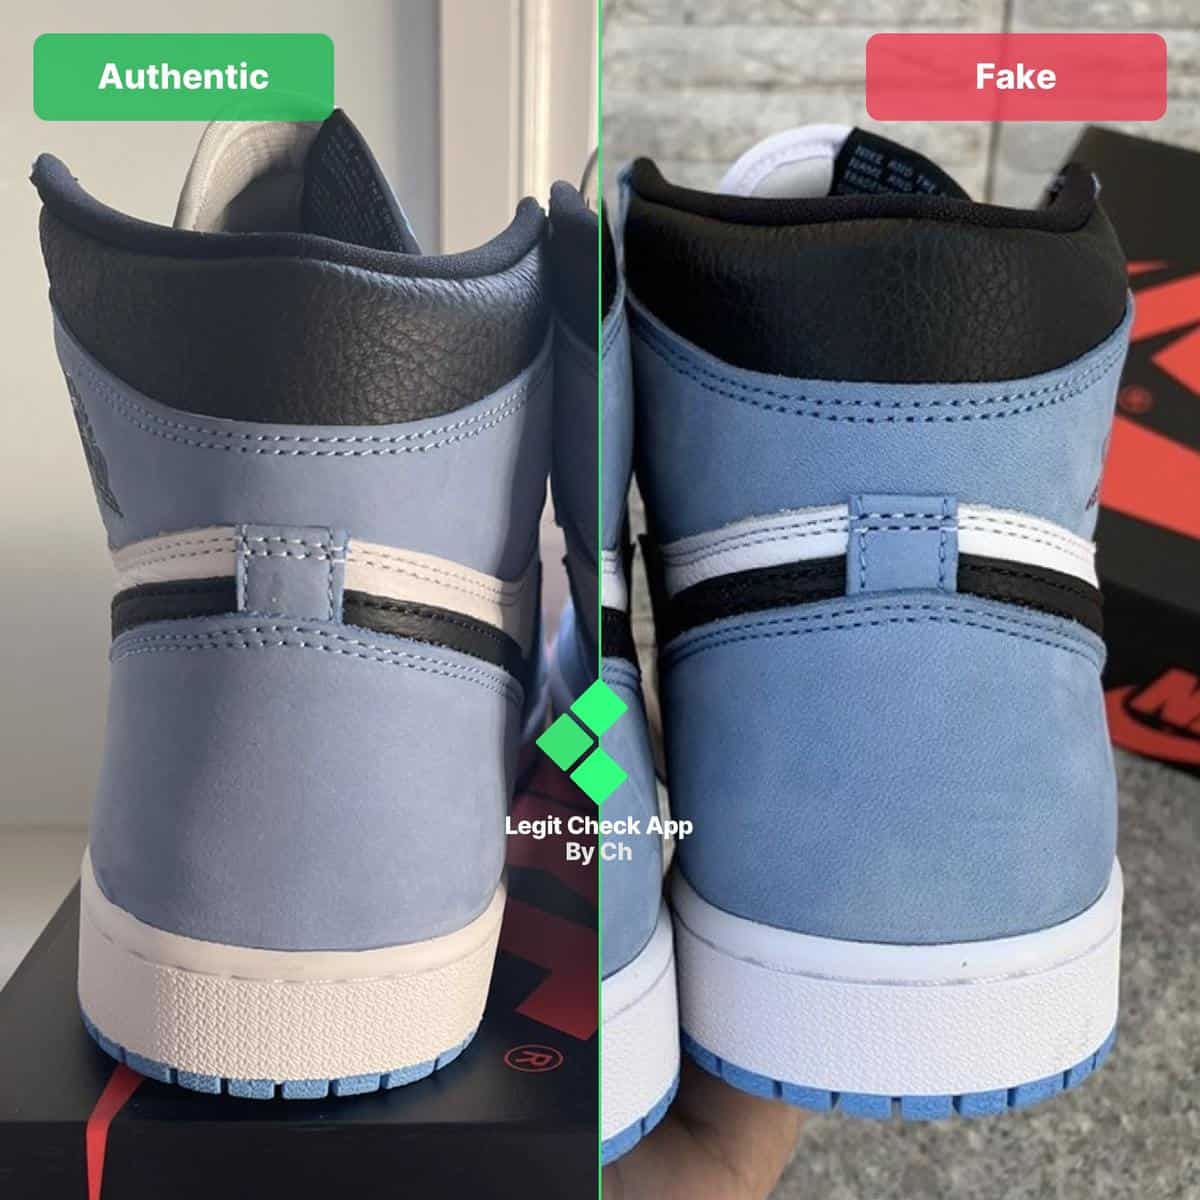 Can i get a Legit Check on this one :) I think it looks good but